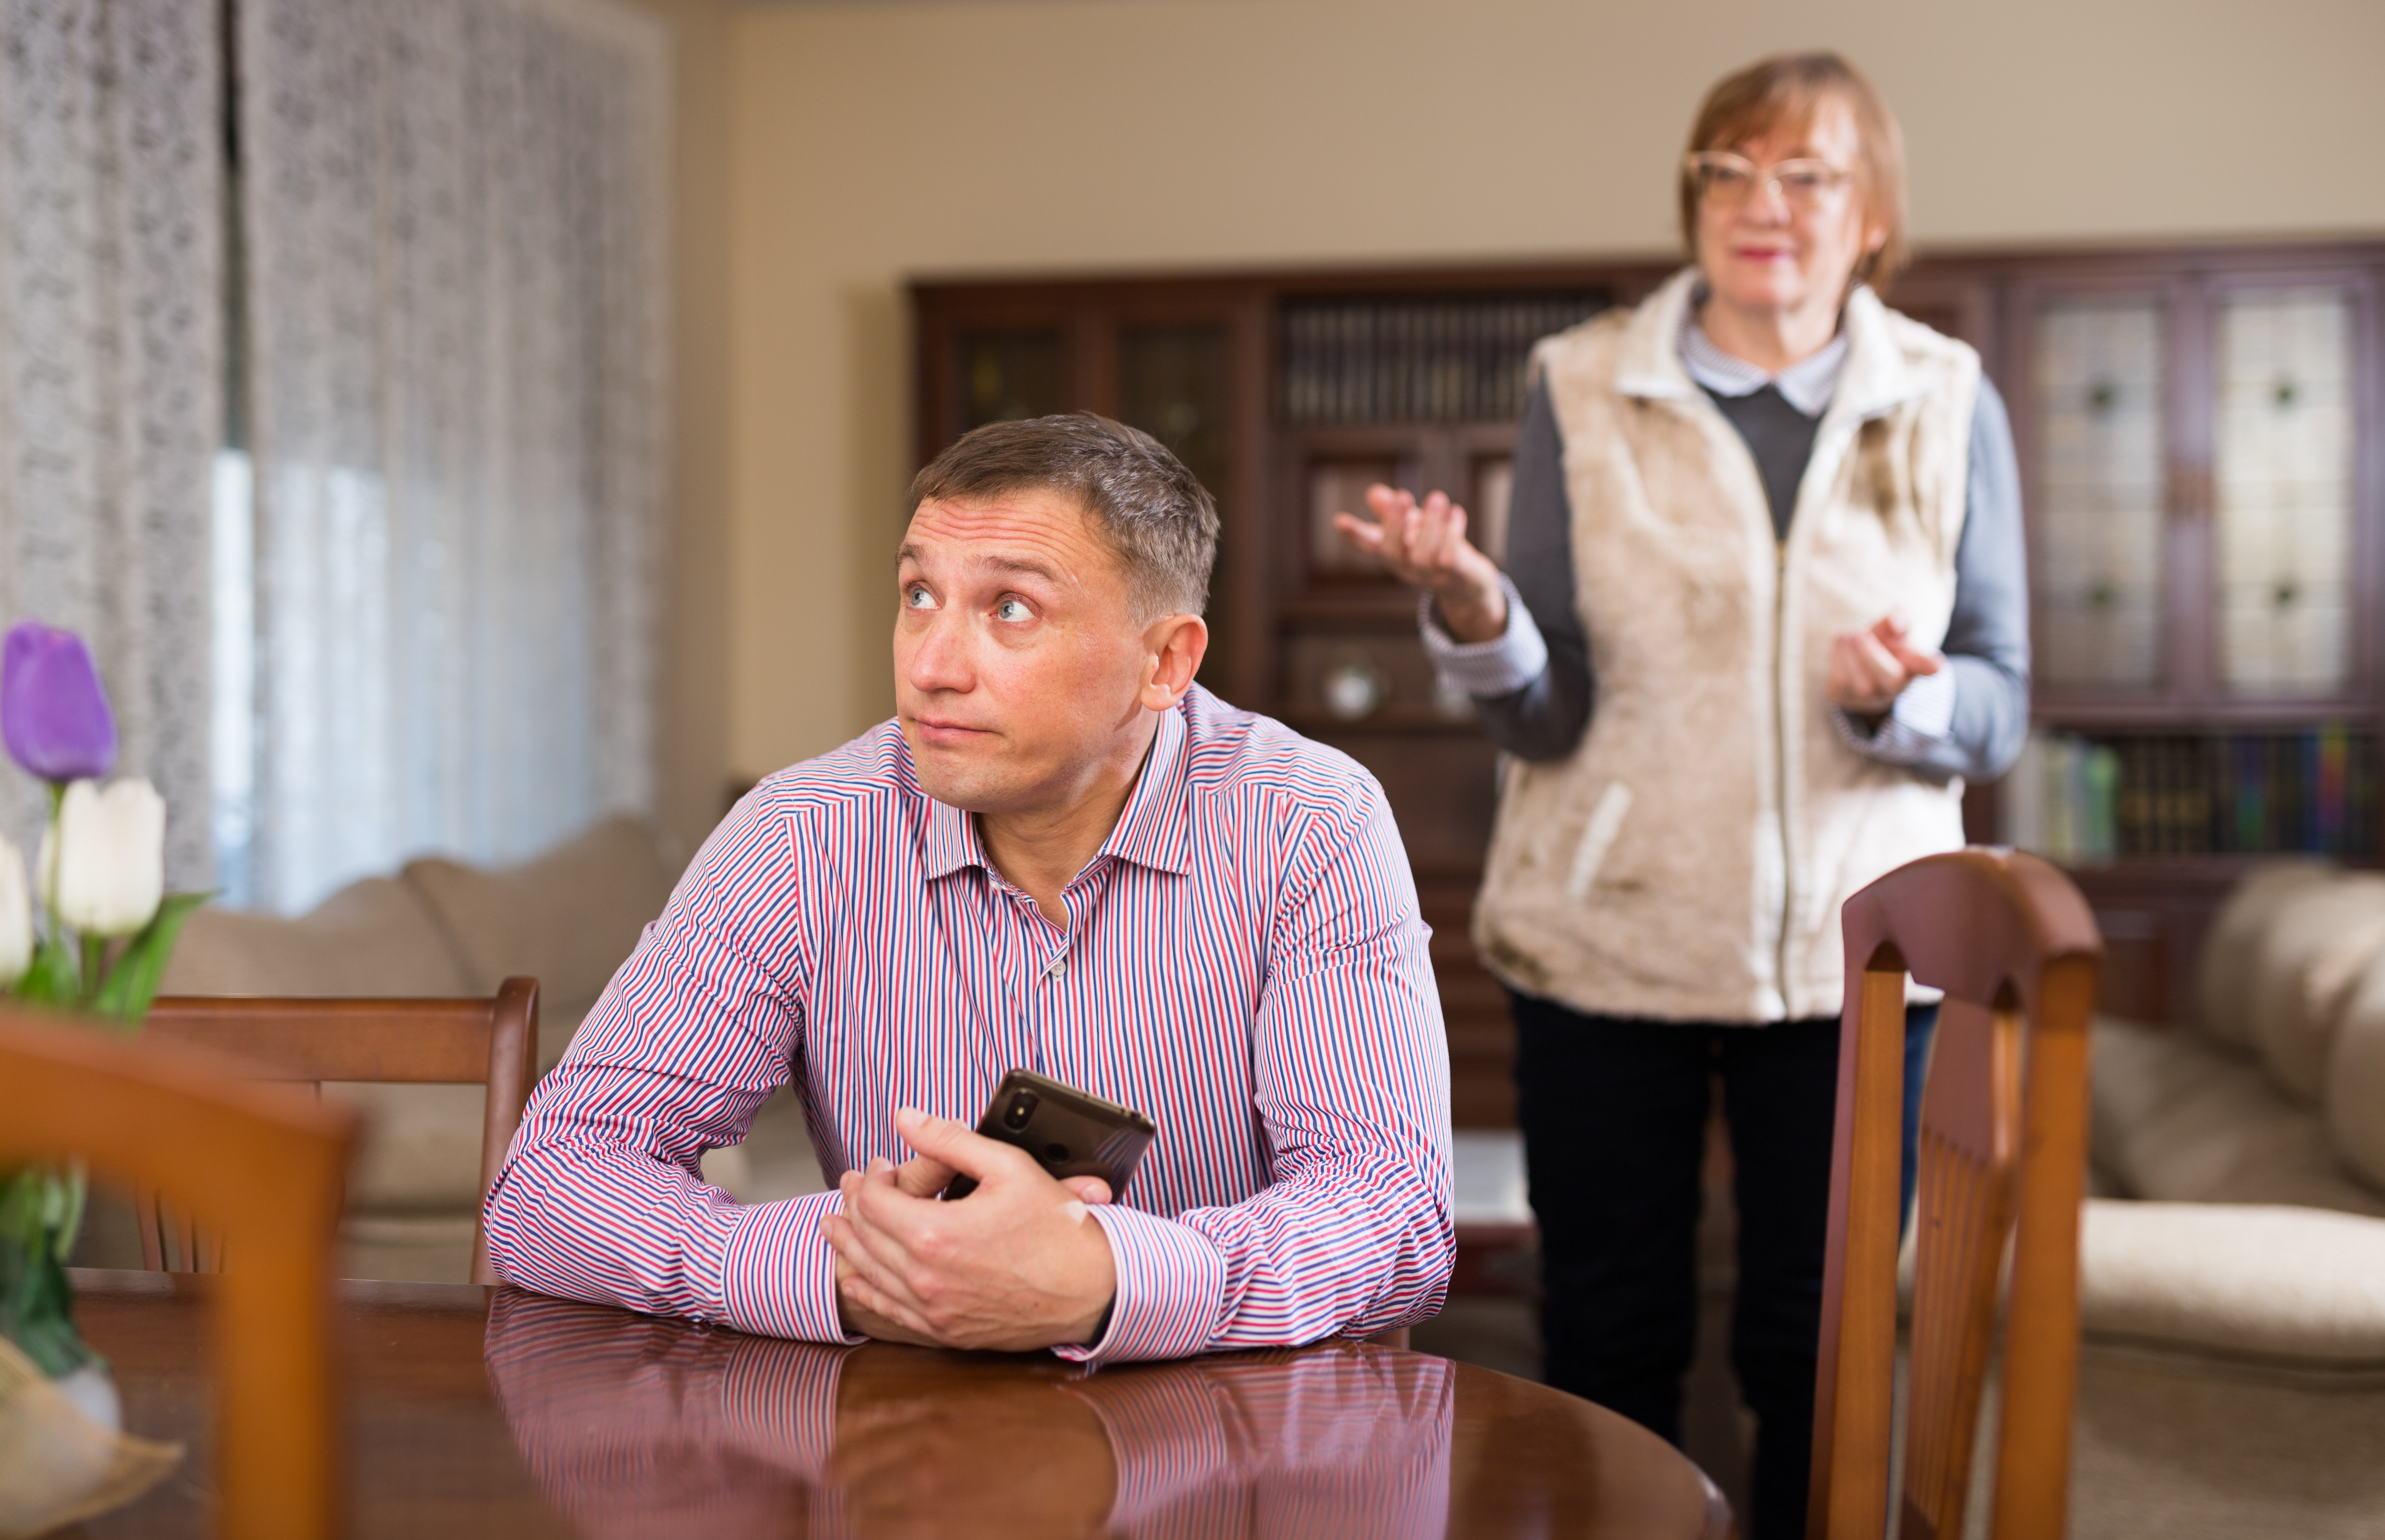 A younger man clutching his phone and looking away while sitting at a table while an older lady tries to speak to him in the background | Source: Shutterstock